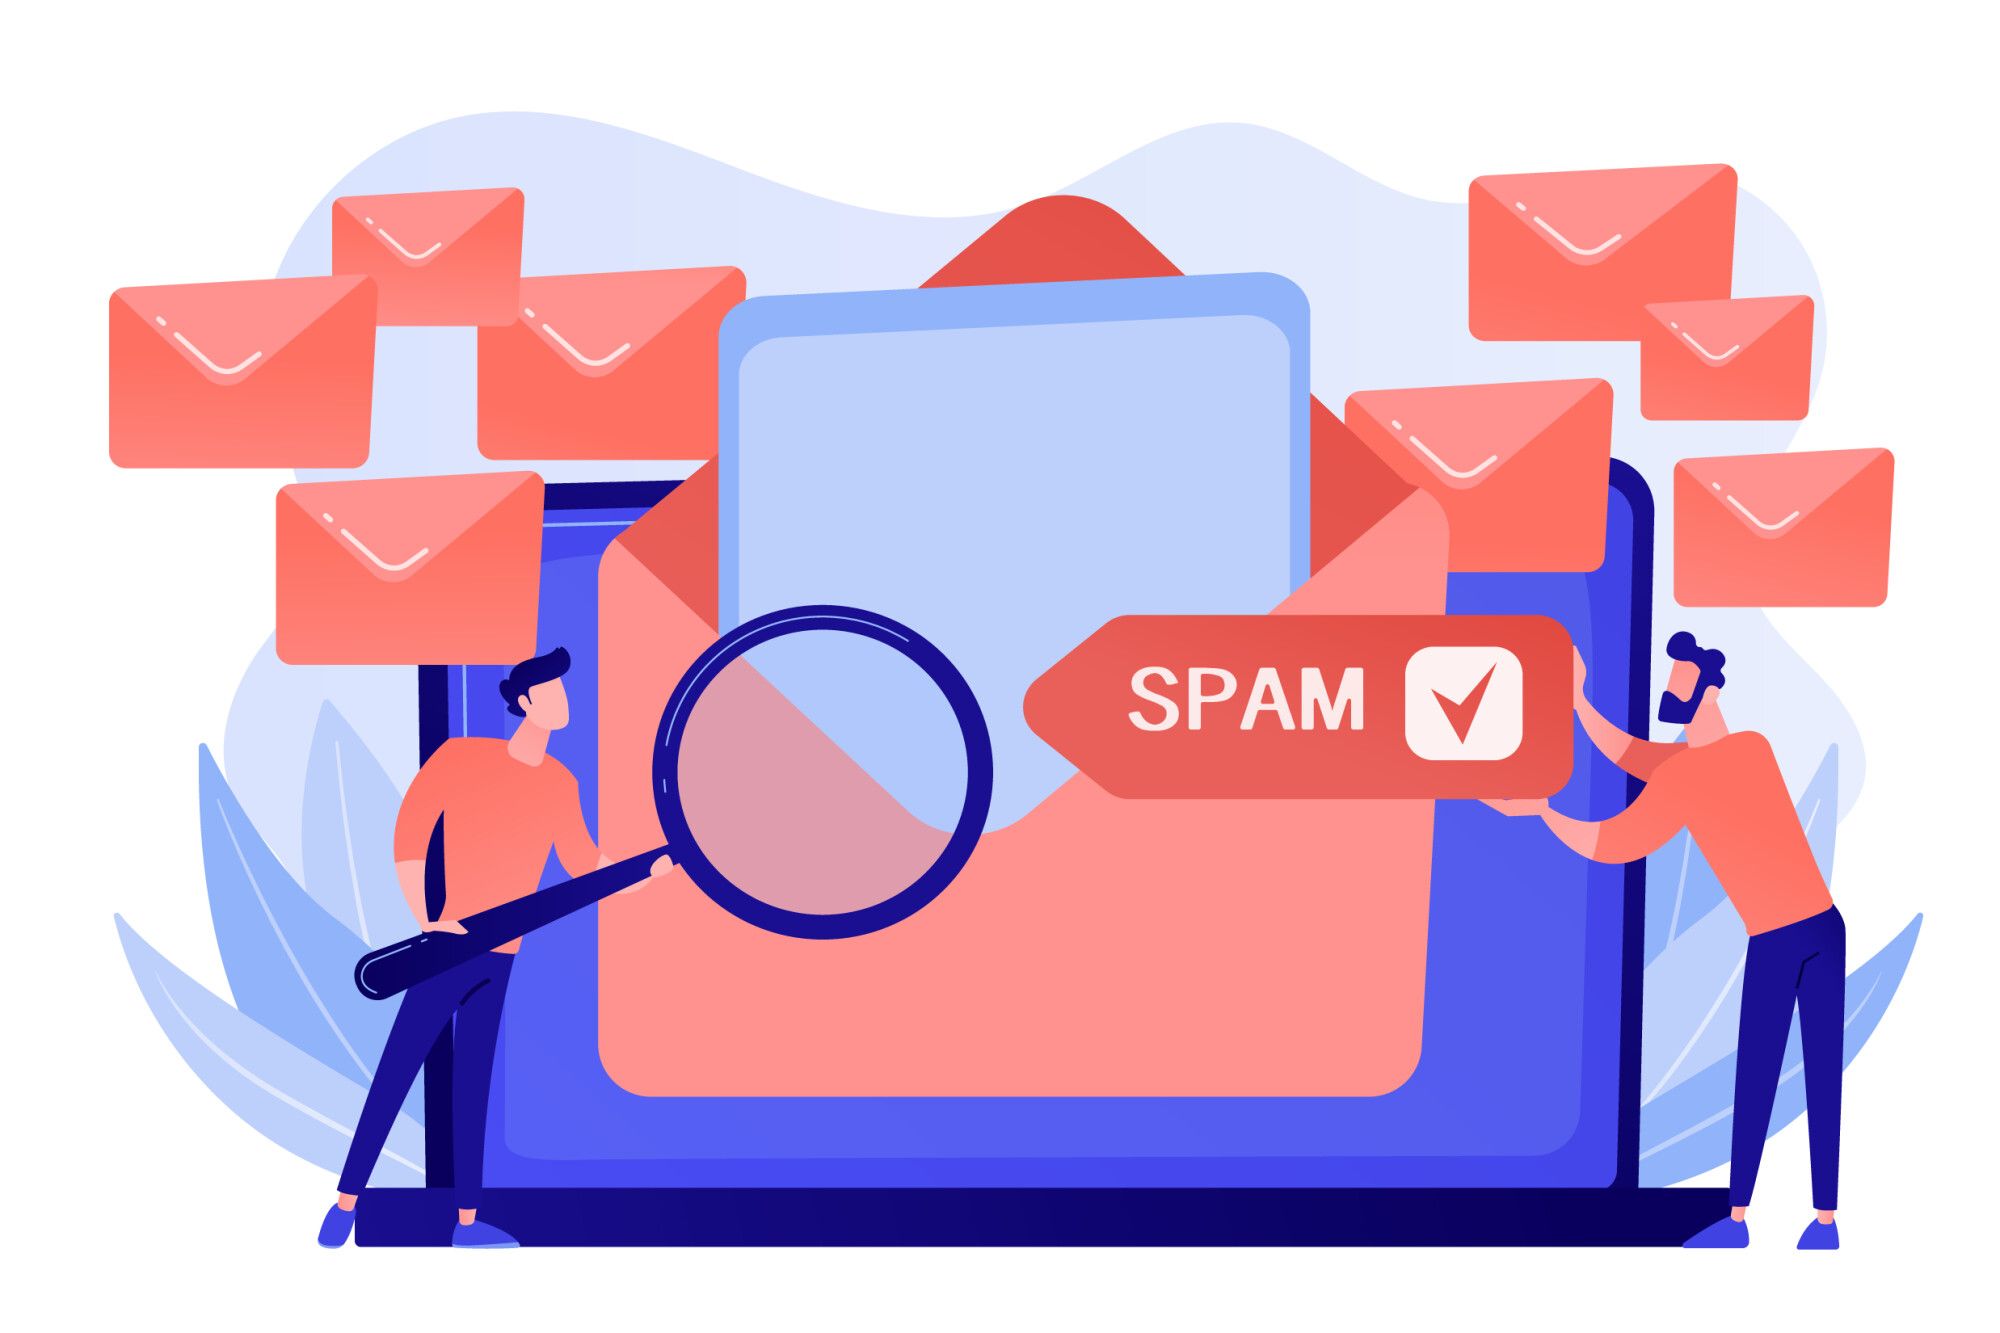 What Are the Different Ways to Filter Out Spam Emails?